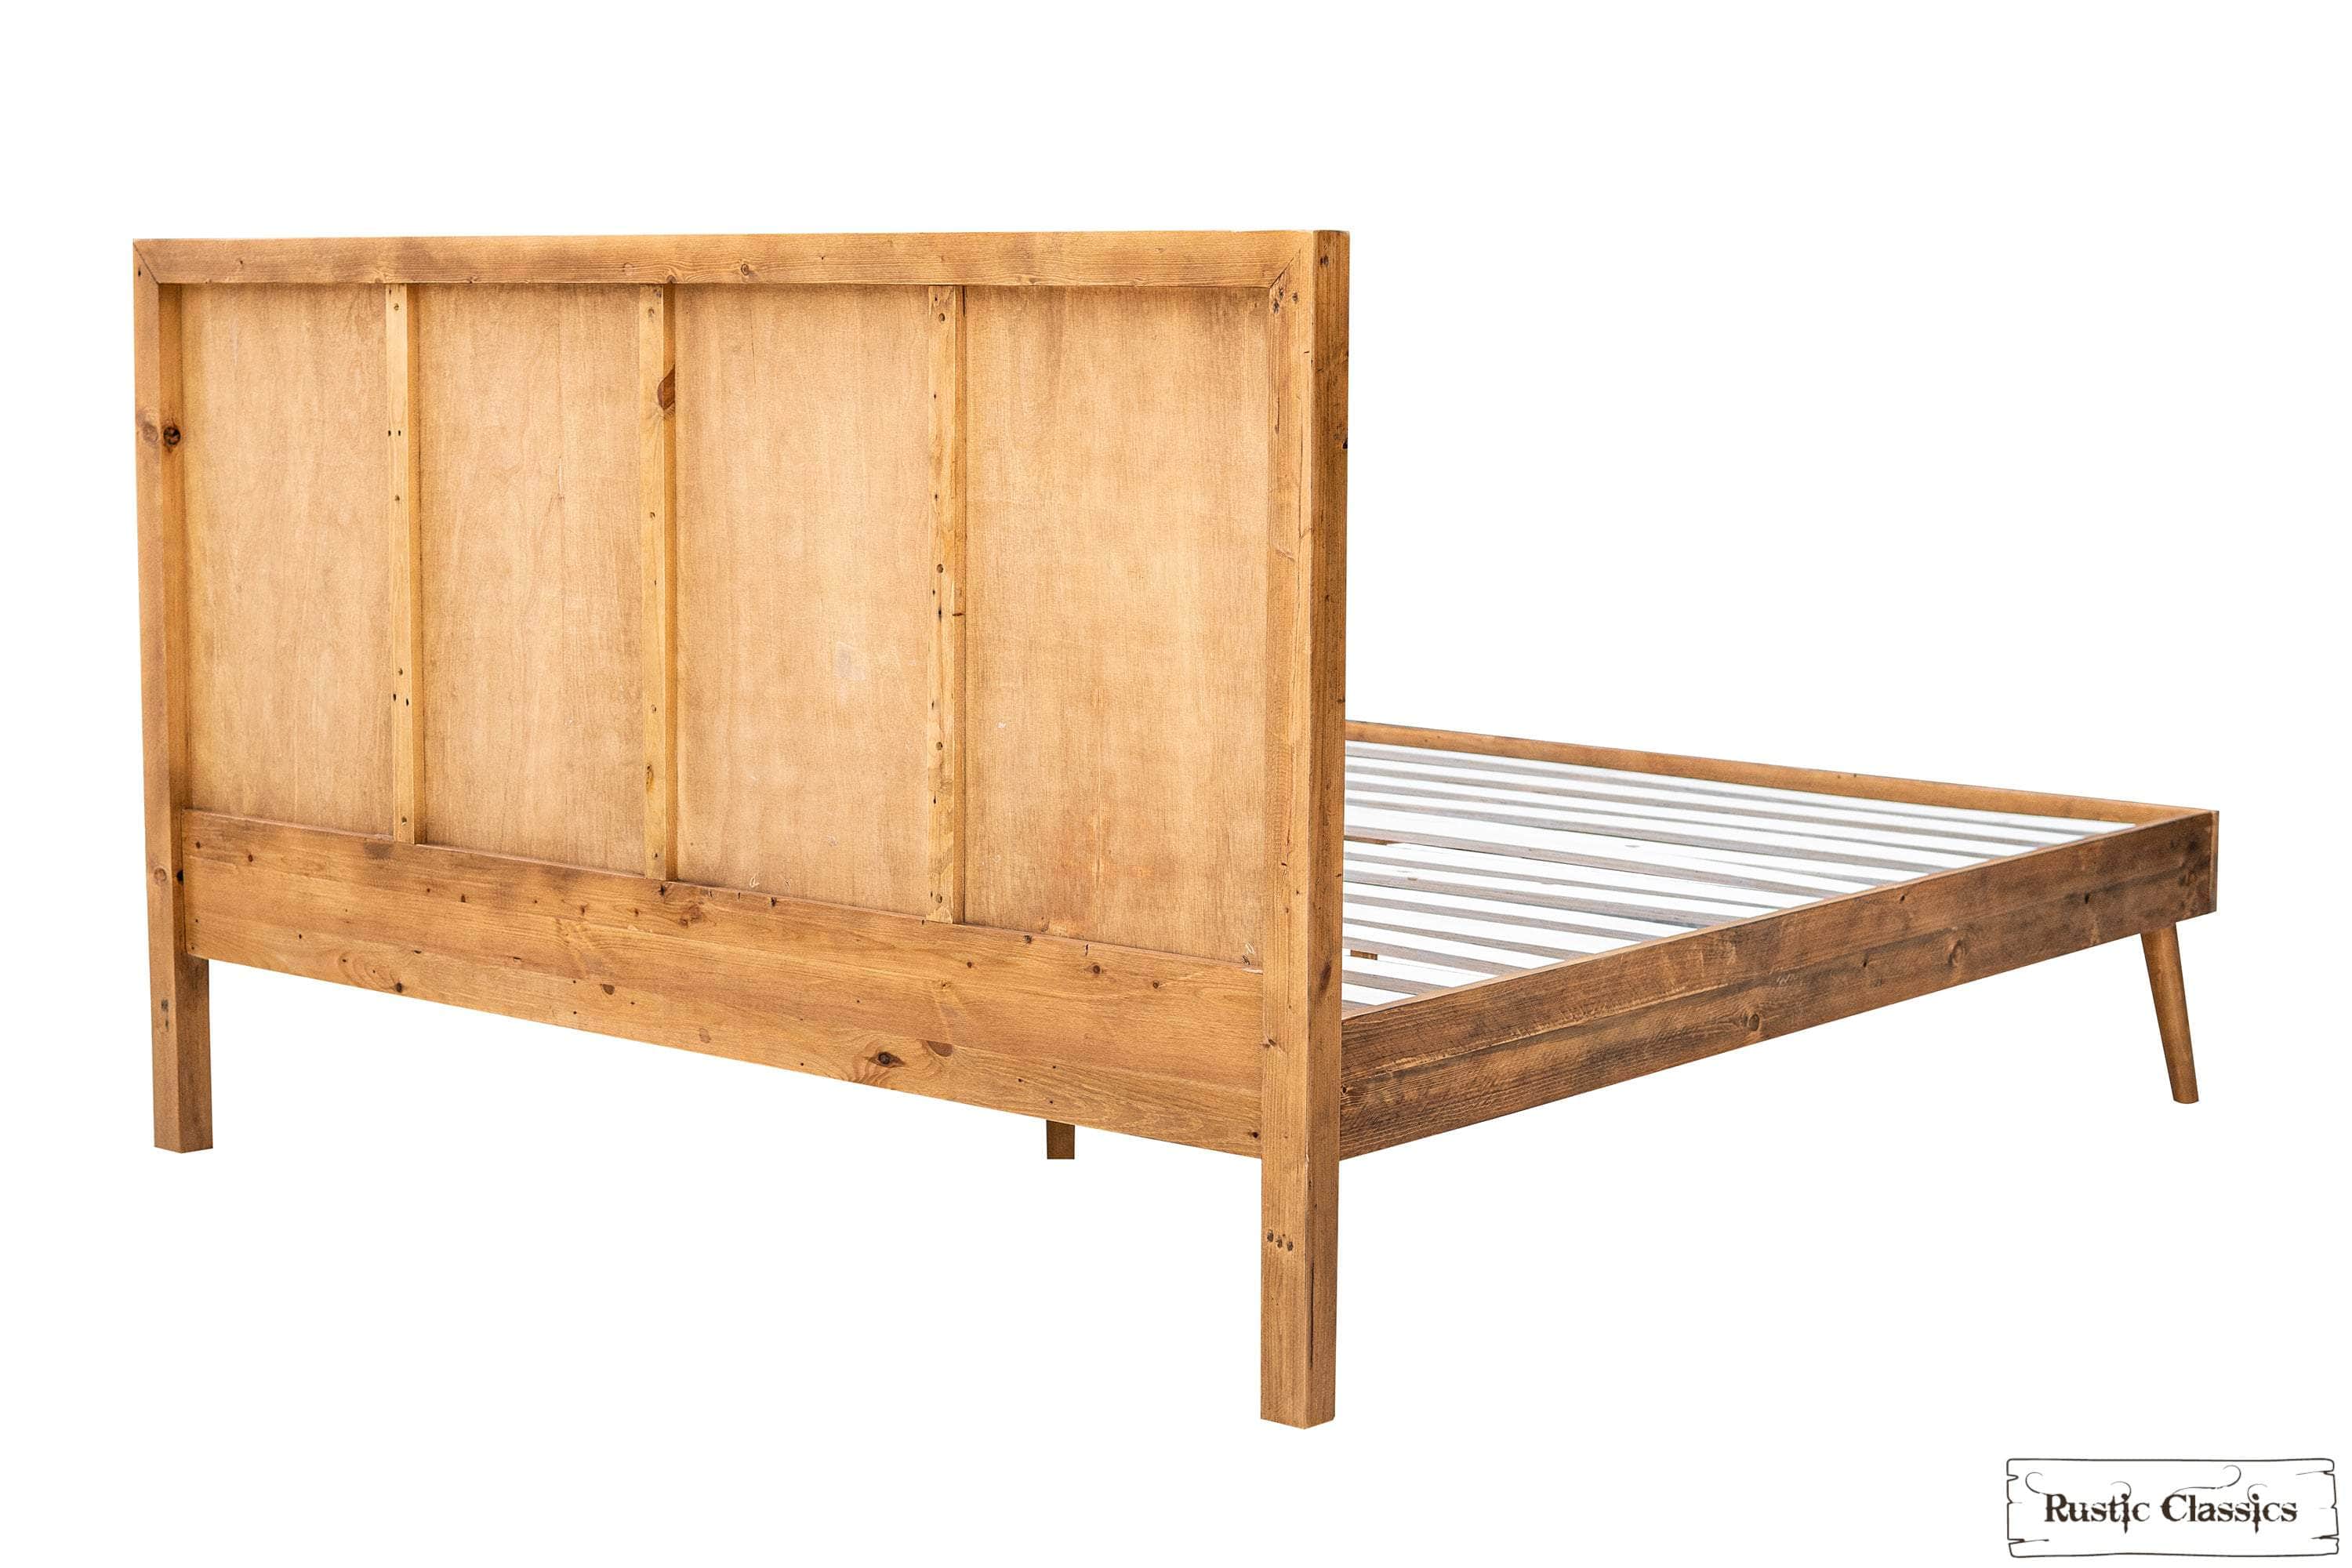 Rustic Classics Bed Cypress Reclaimed Wood Platform Bed in Spice - Available in 2 Sizes